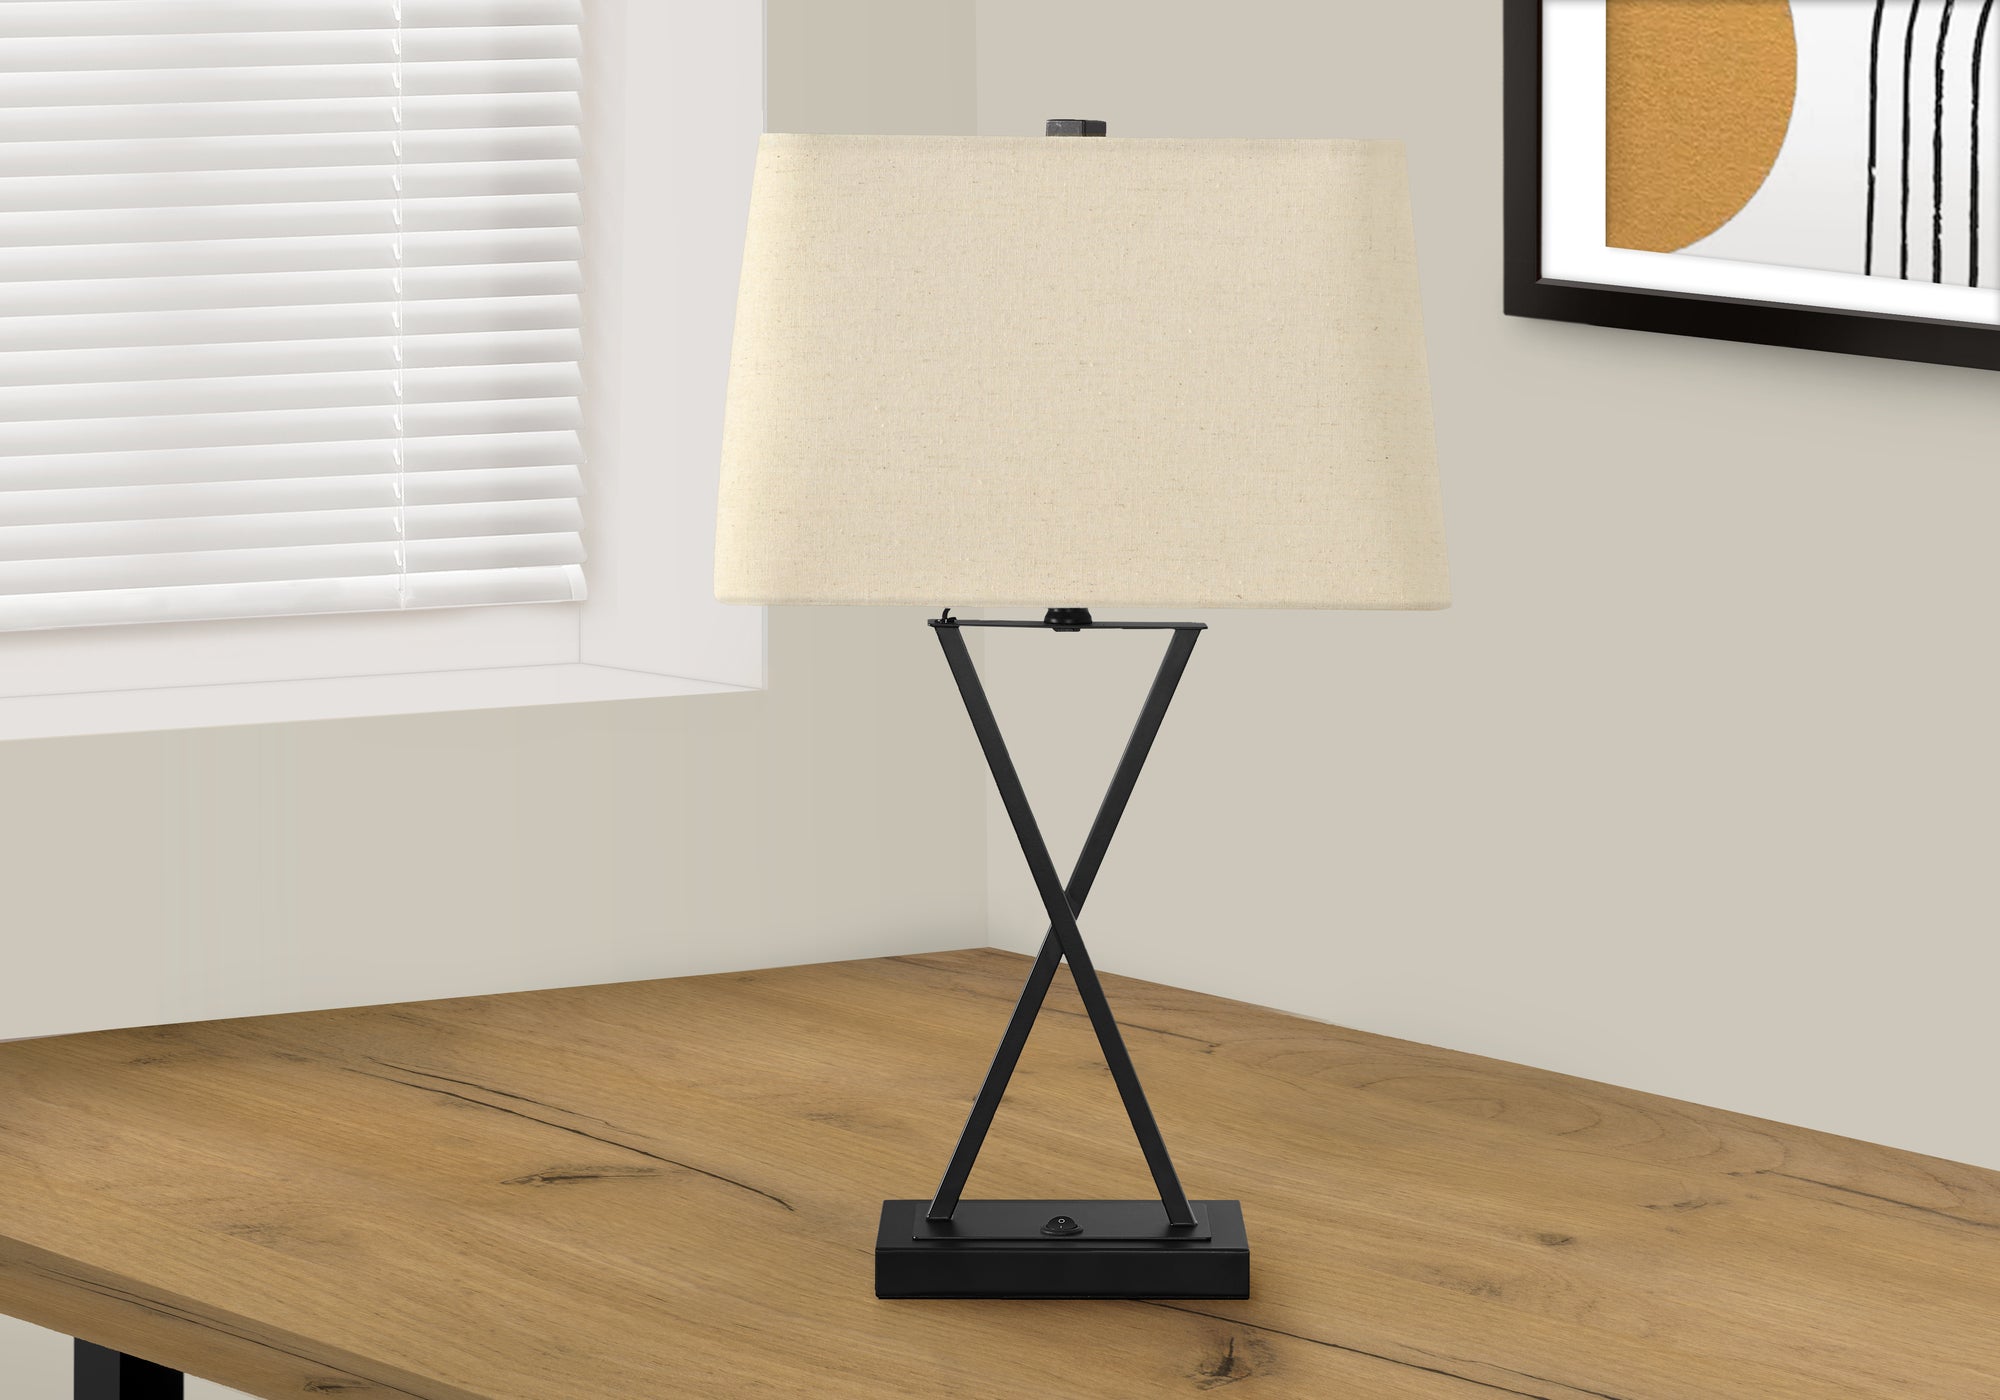 MN-199638    Lighting, 25"H, Table Lamp, Usb Port Included, Black Metal, Beige Shade, Transitional